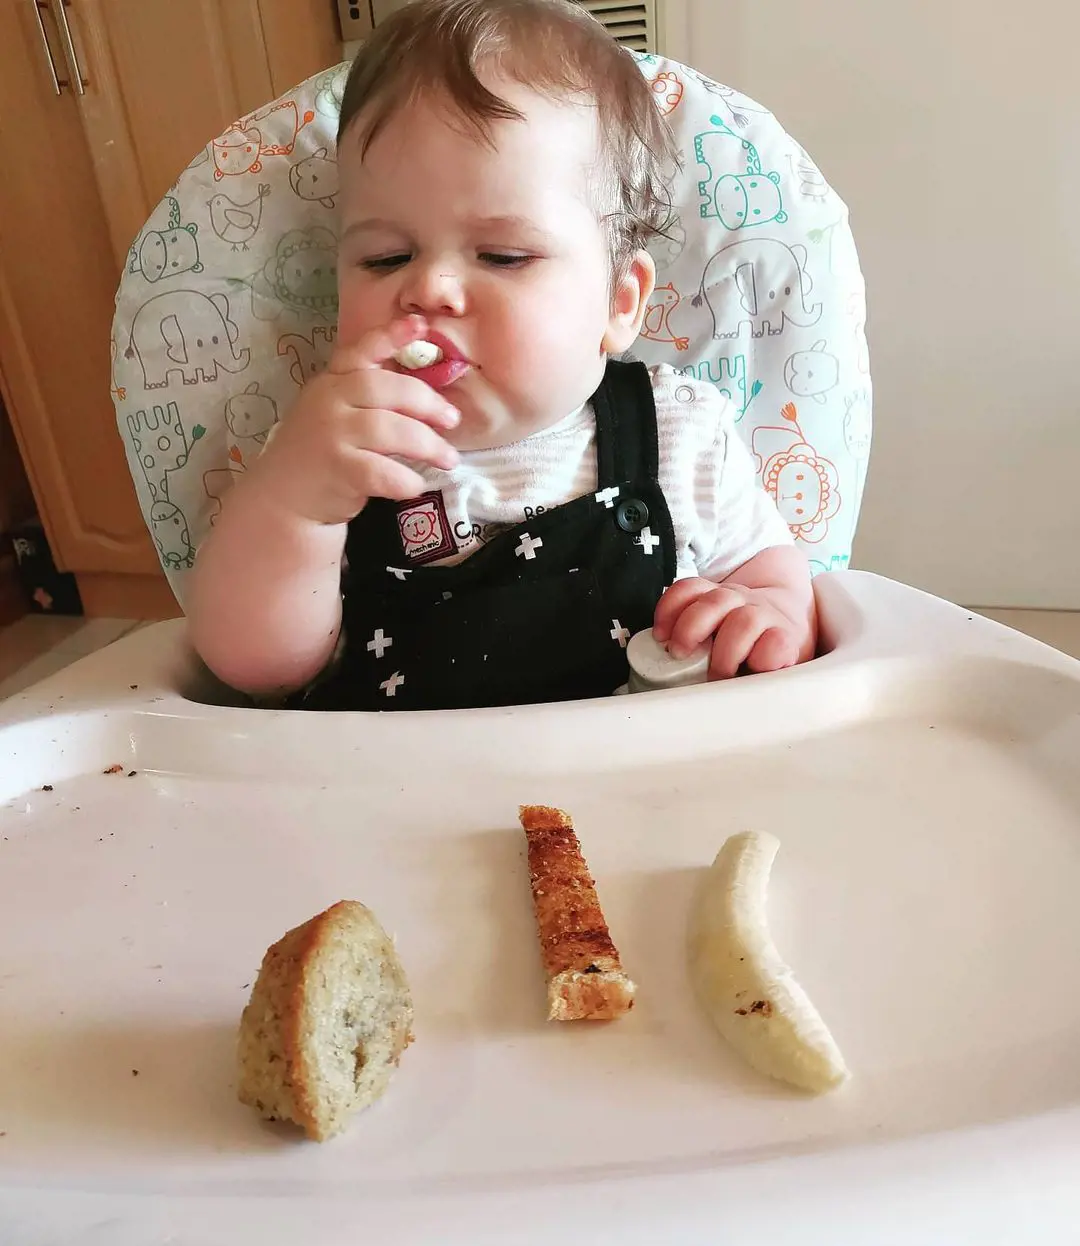 Baby munches on tasty snacks after getting introduced to solid foods